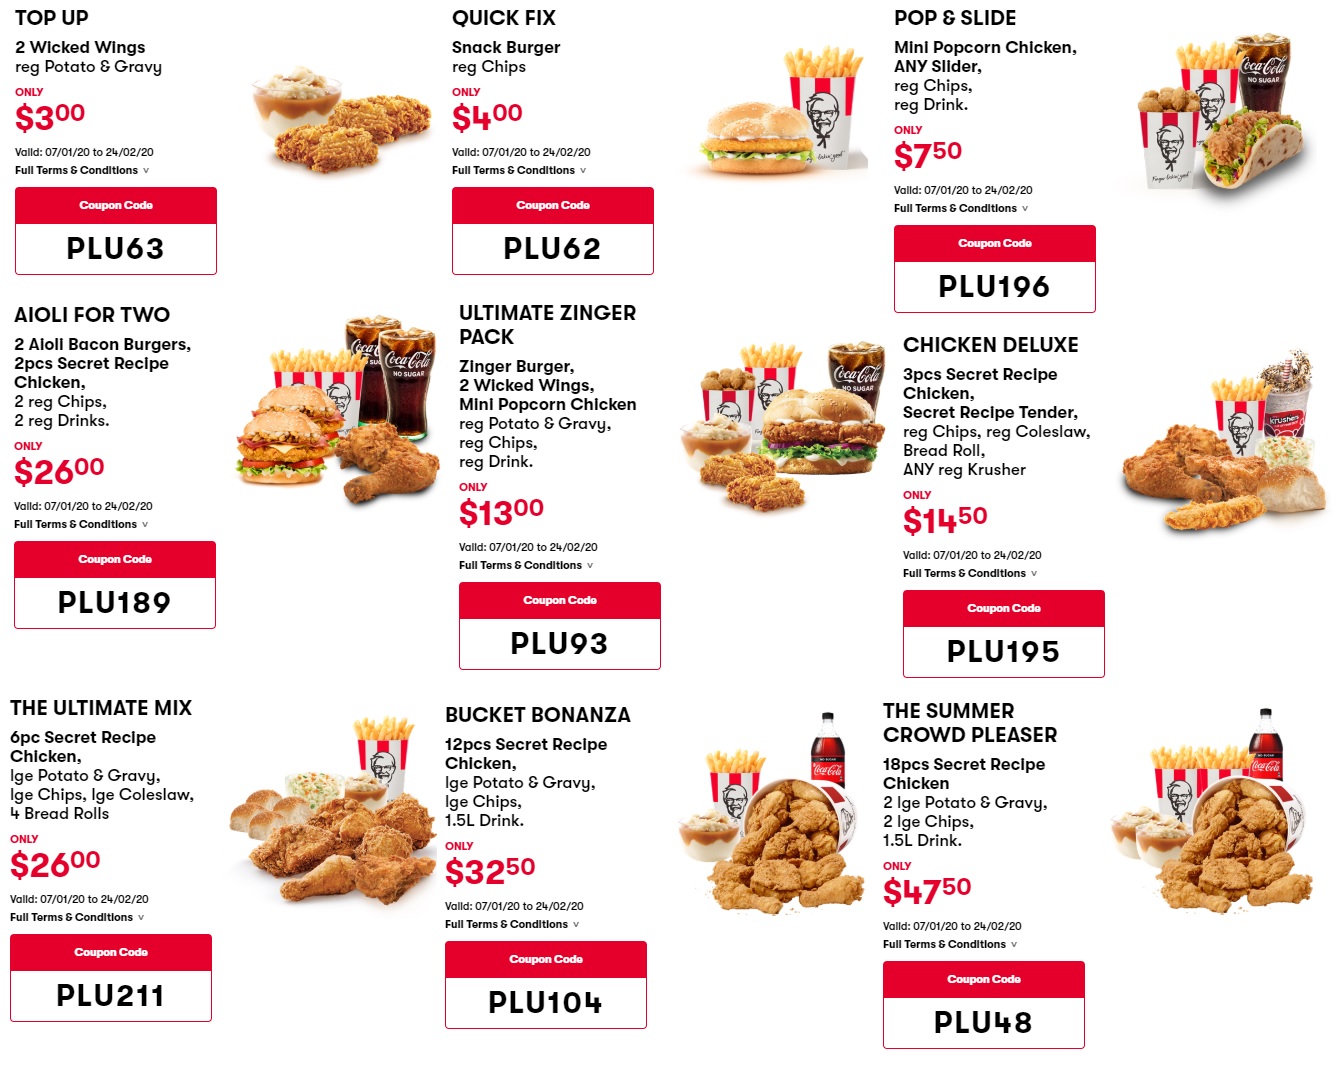 Coupon code applicable to all kfc food items. 